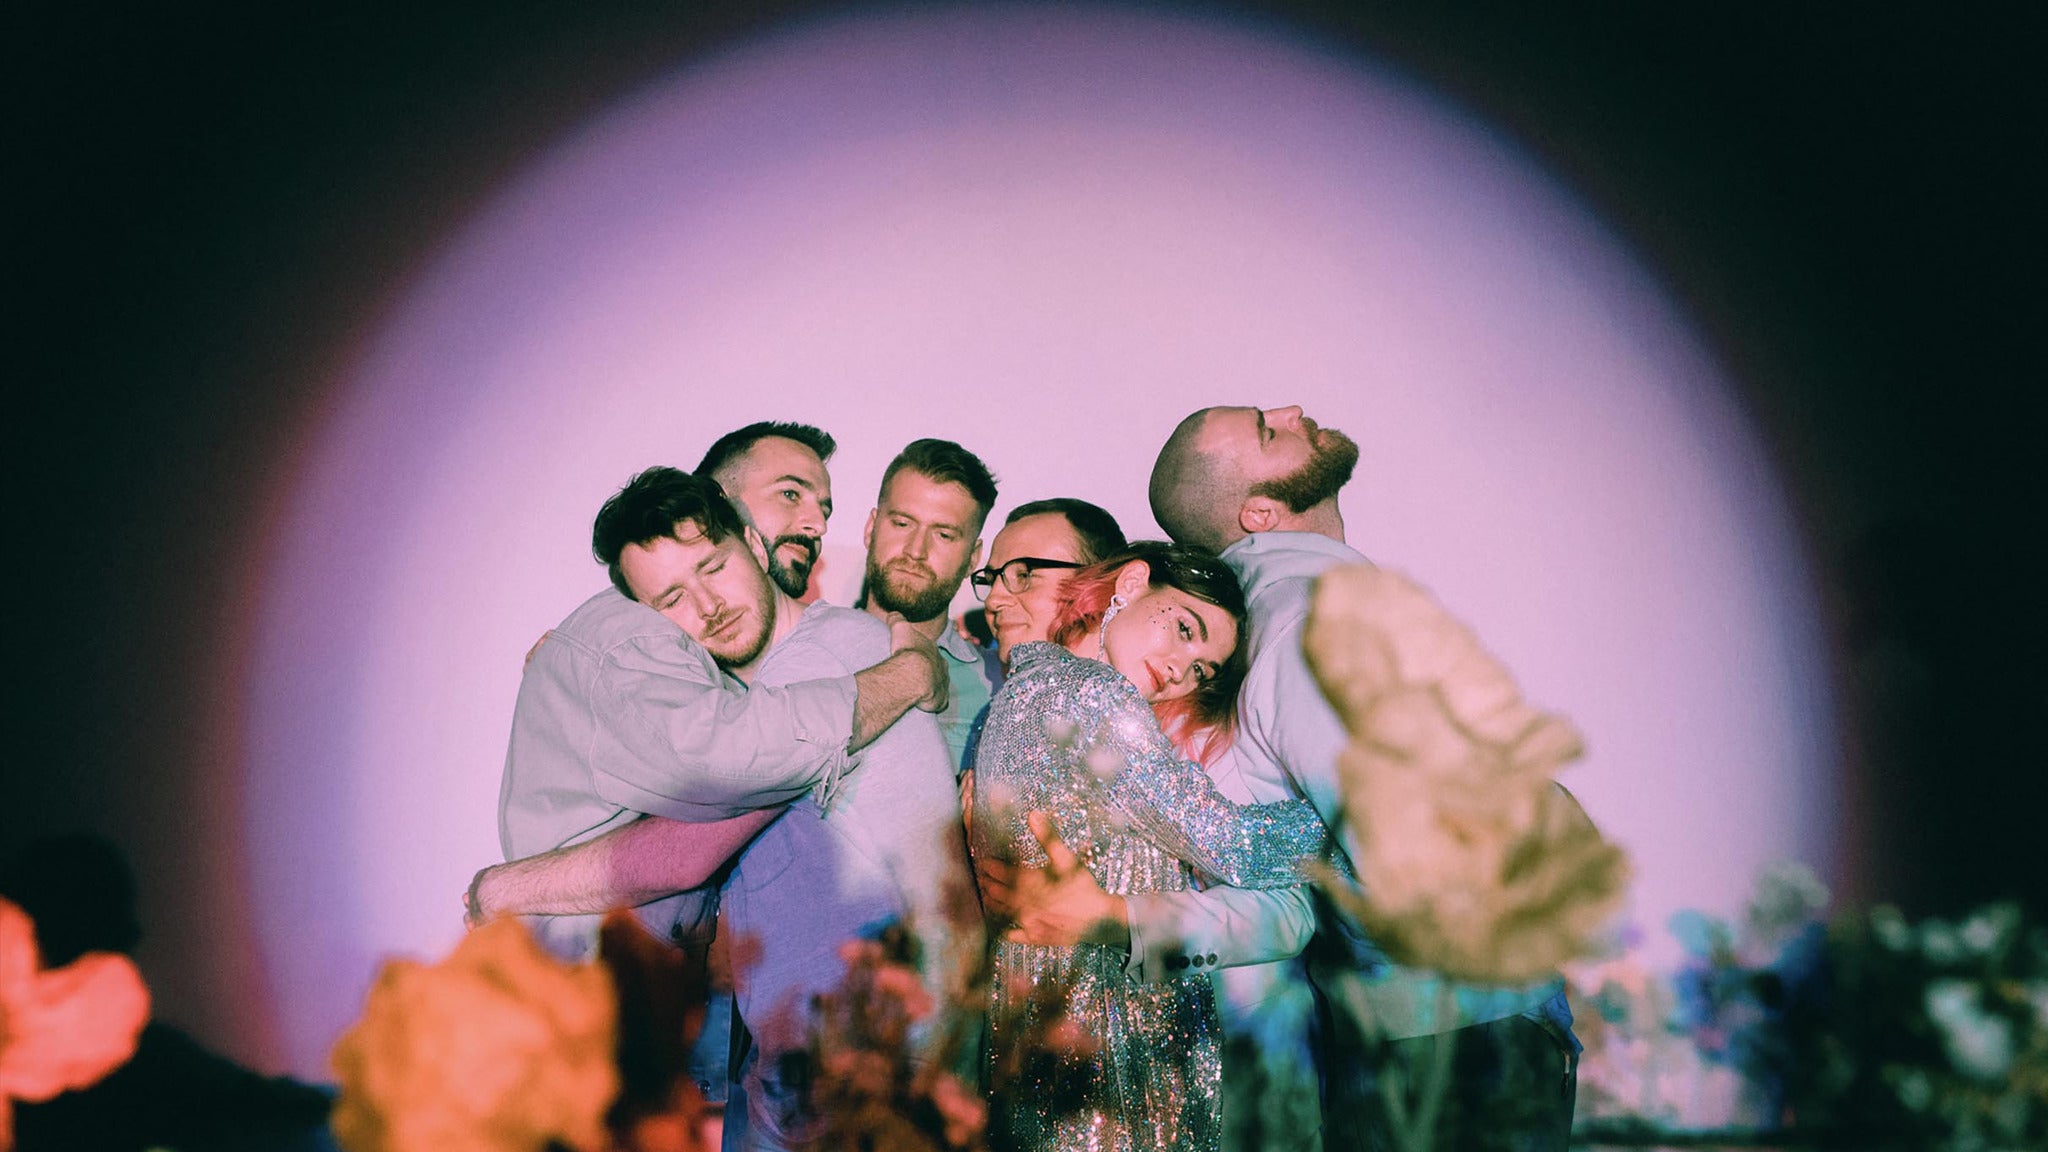 Lawrence and MisterWives - Sounds of Summer Tour presale passcode